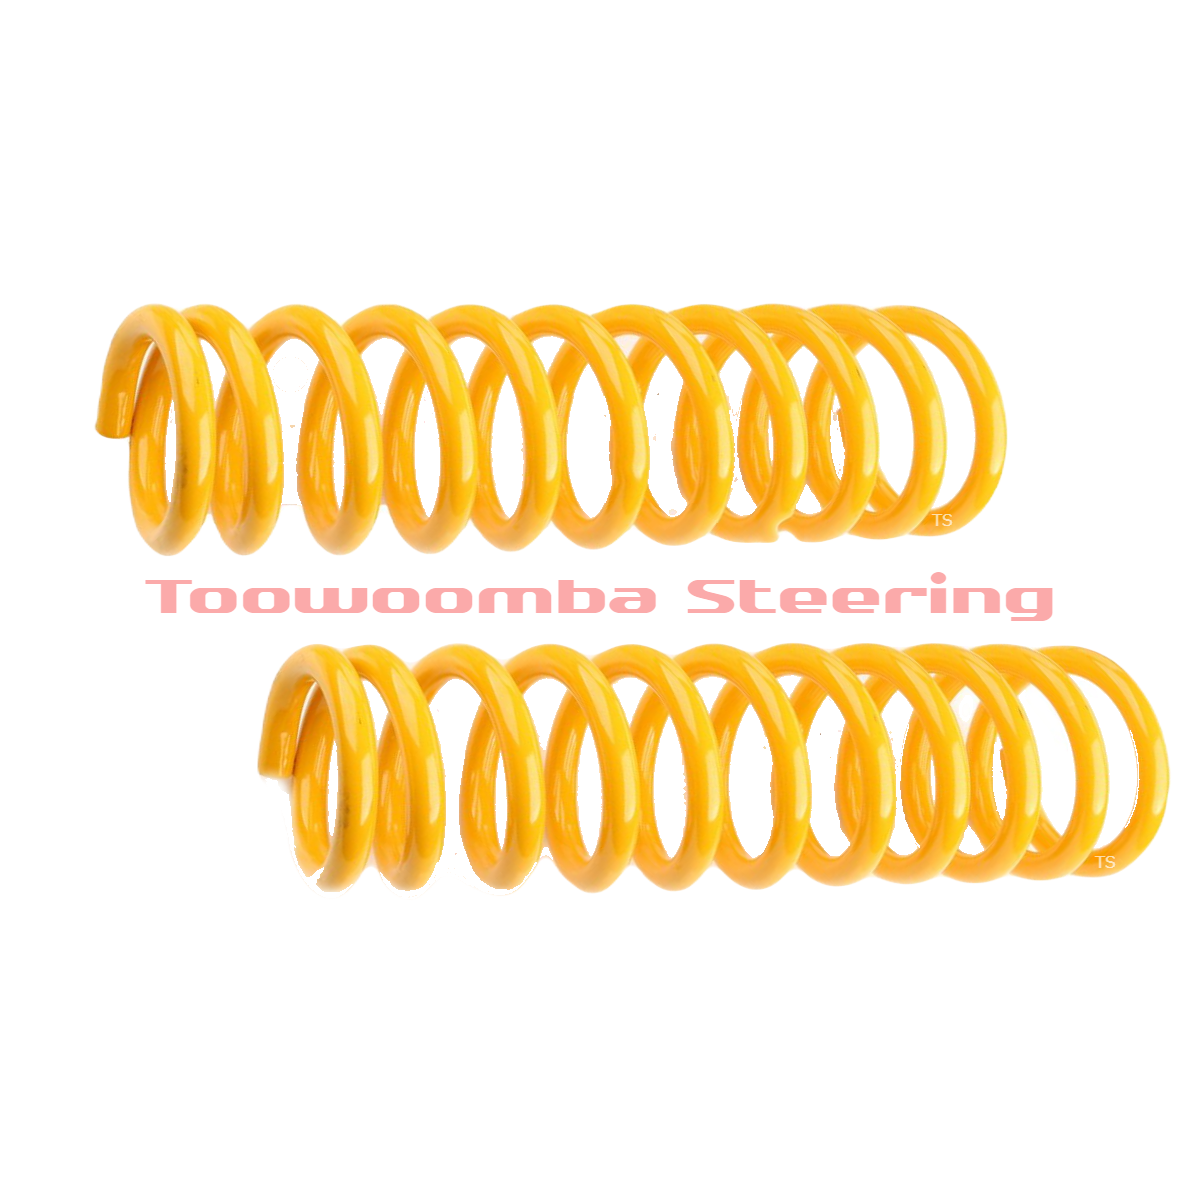 Rear Raised King Springs  -  Ideal for - Nissan Pathfinder R51 – 2.5L; 4.0L 11/05-15, Nissan Pathfinder R51 – 3.0L V6 11/05-15 - (KDRR-71)